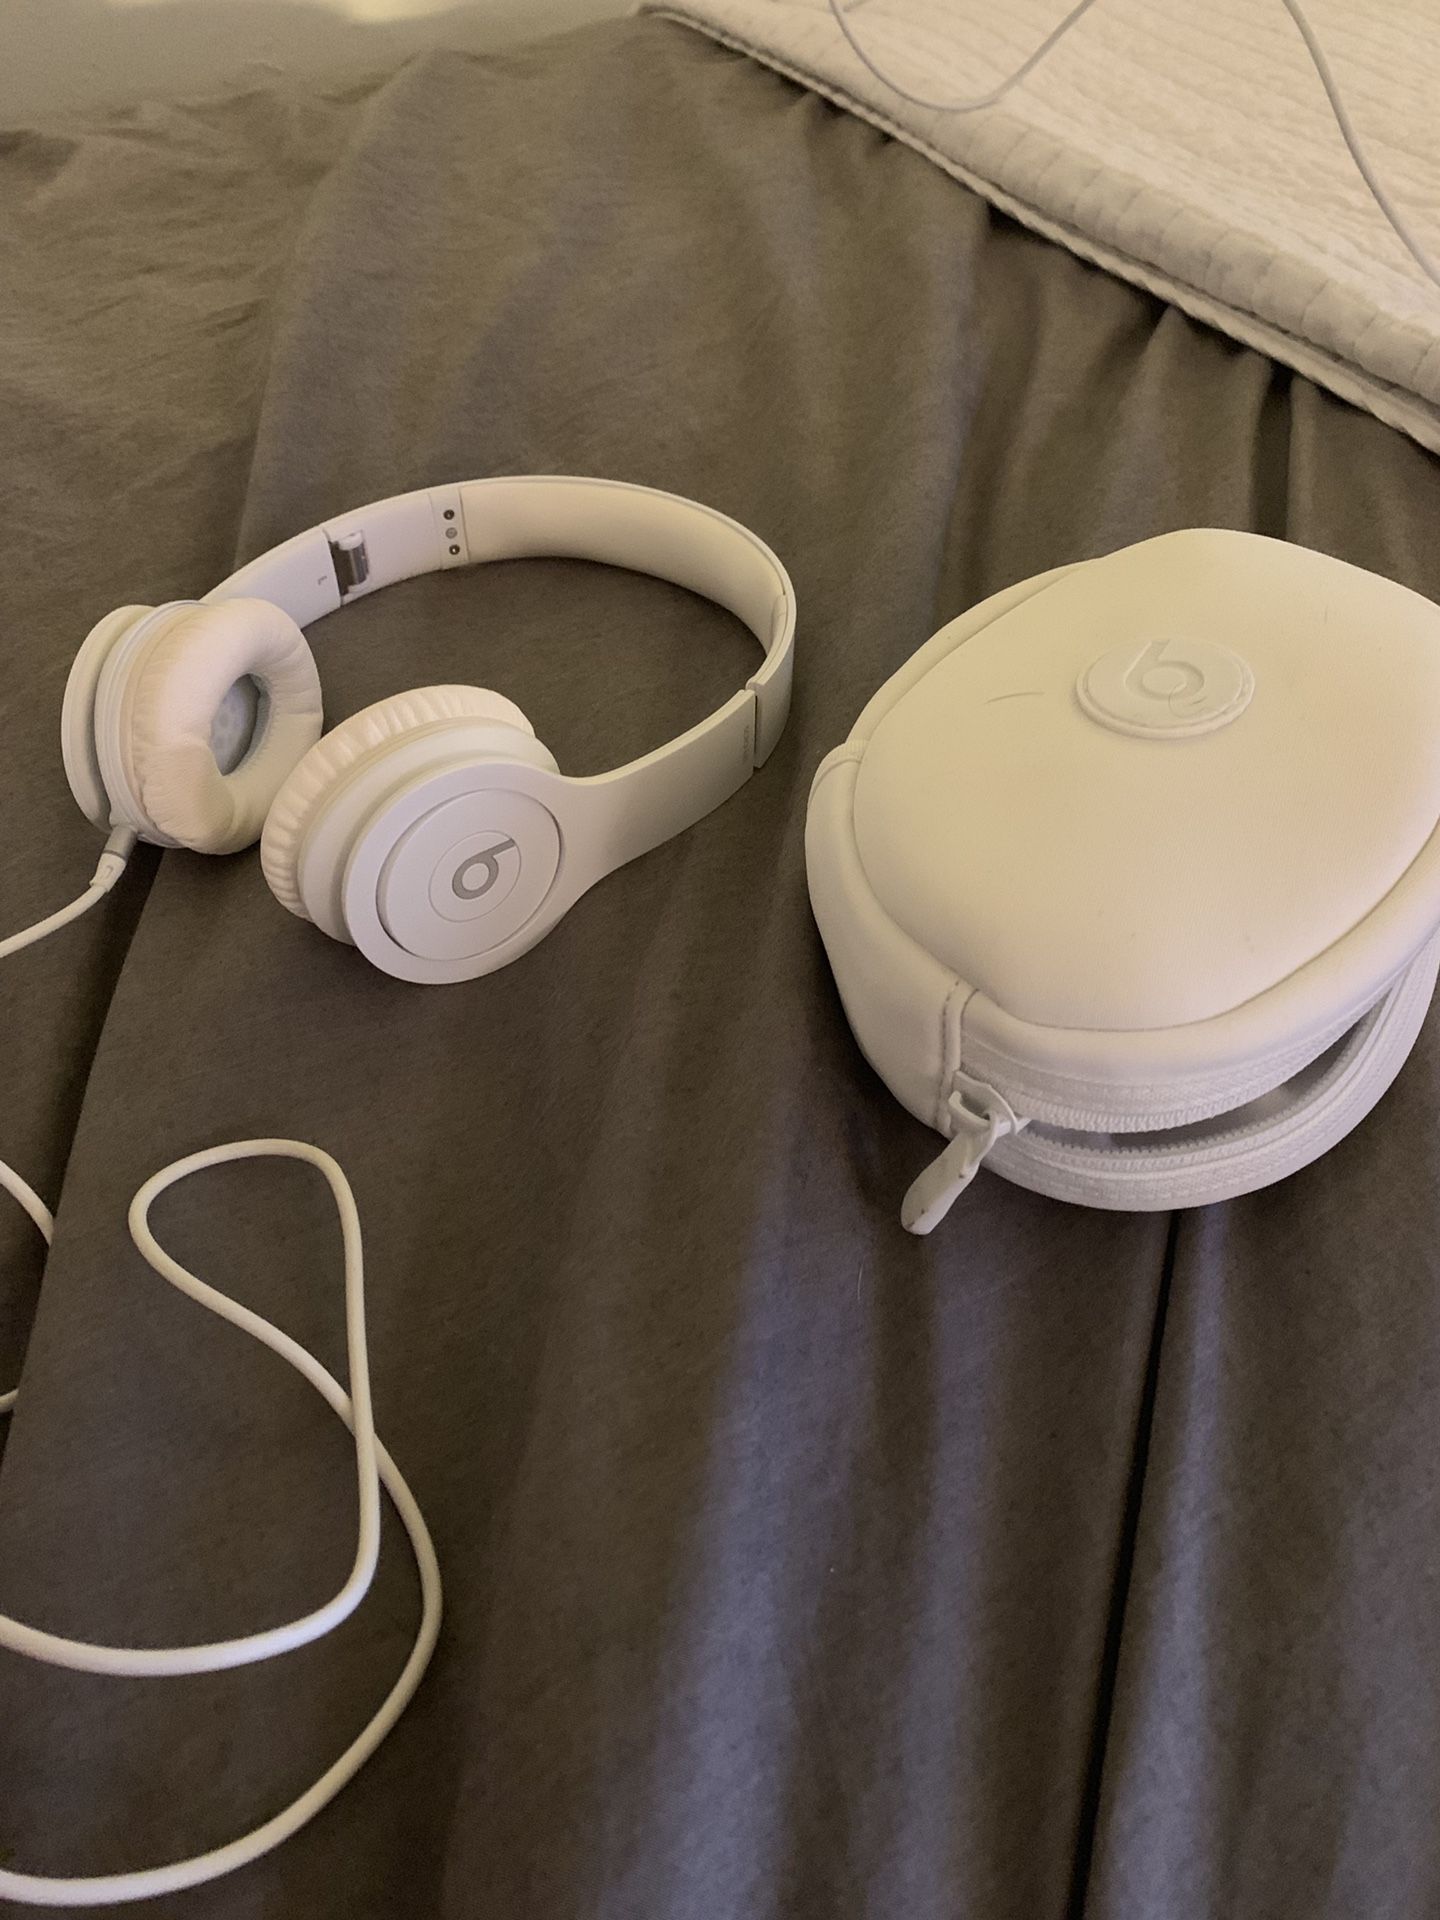 Beats Solo HD, Wired, On Ear Headphones. Lightly Used.